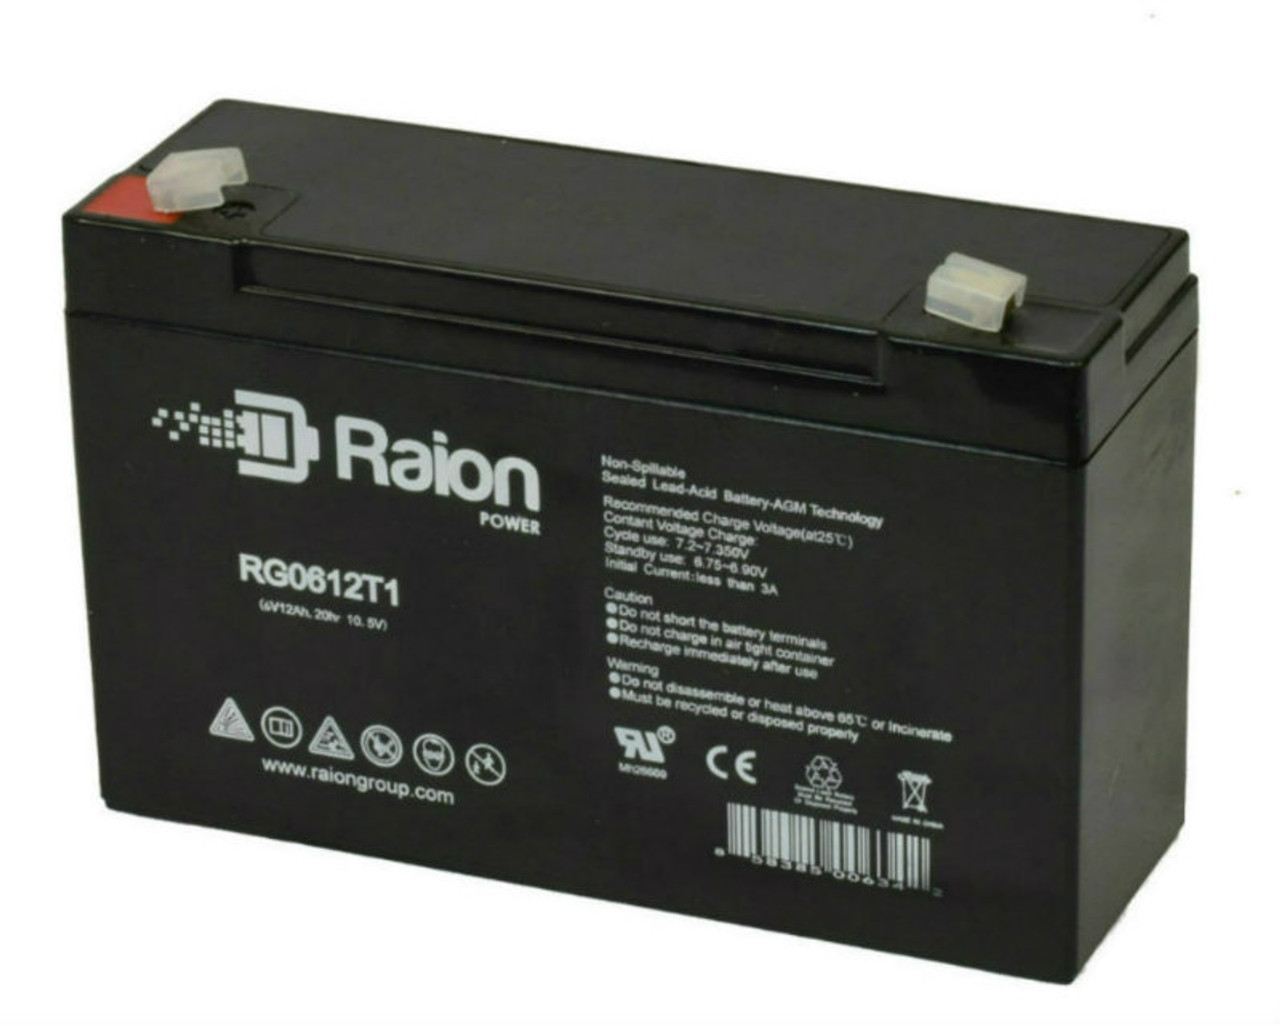 Raion Power RG06120T1 Replacement Battery for Alaris Medical 800 Infusion Pumps Medical Equipment